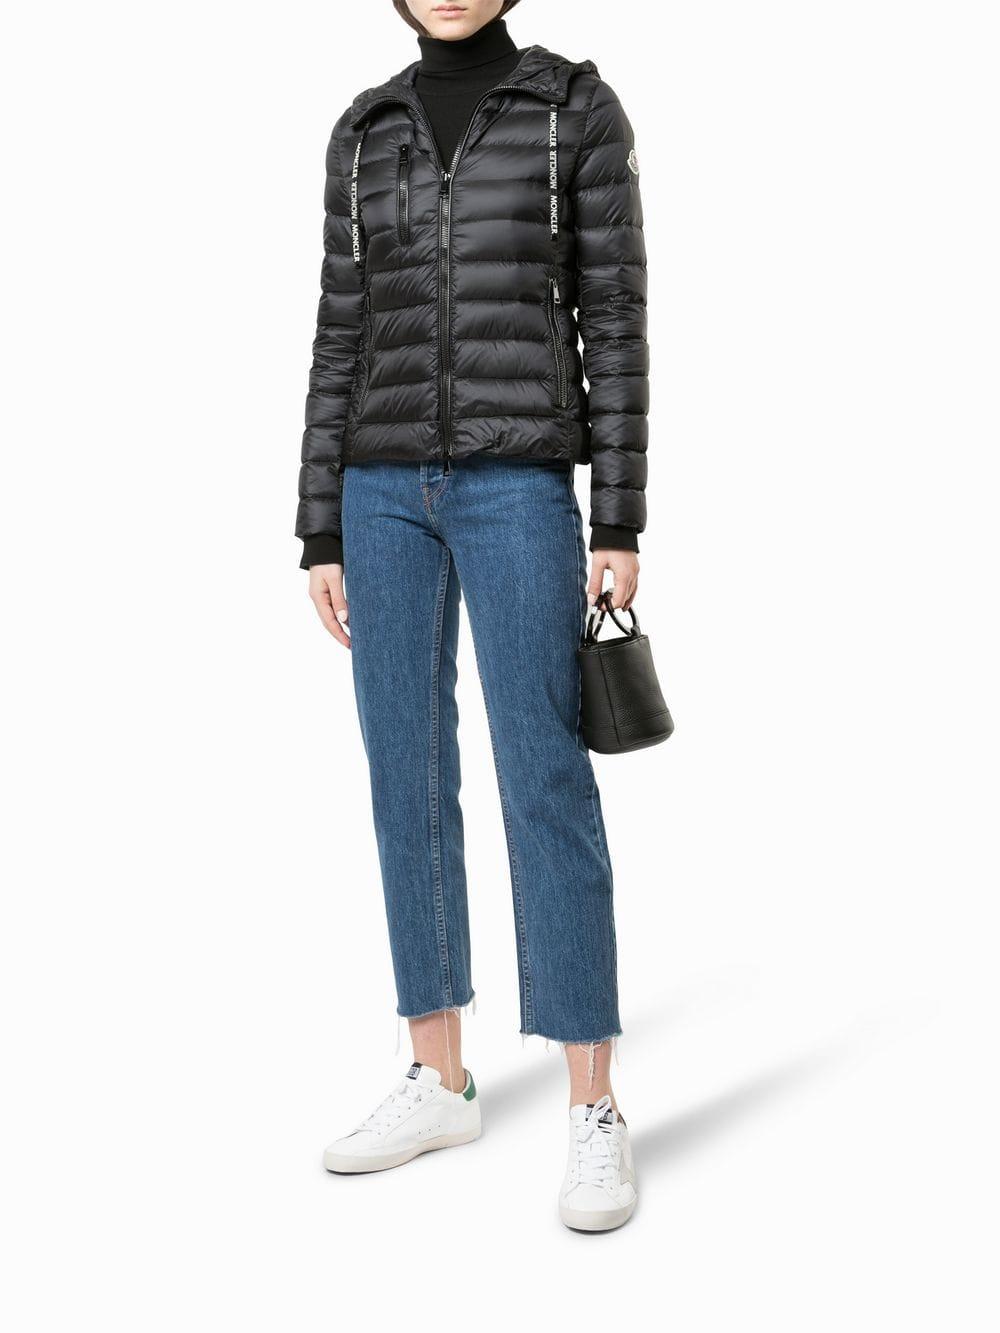 moncler seoul black Cheaper Than Retail Price> Buy Clothing, Accessories  and lifestyle products for women & men -